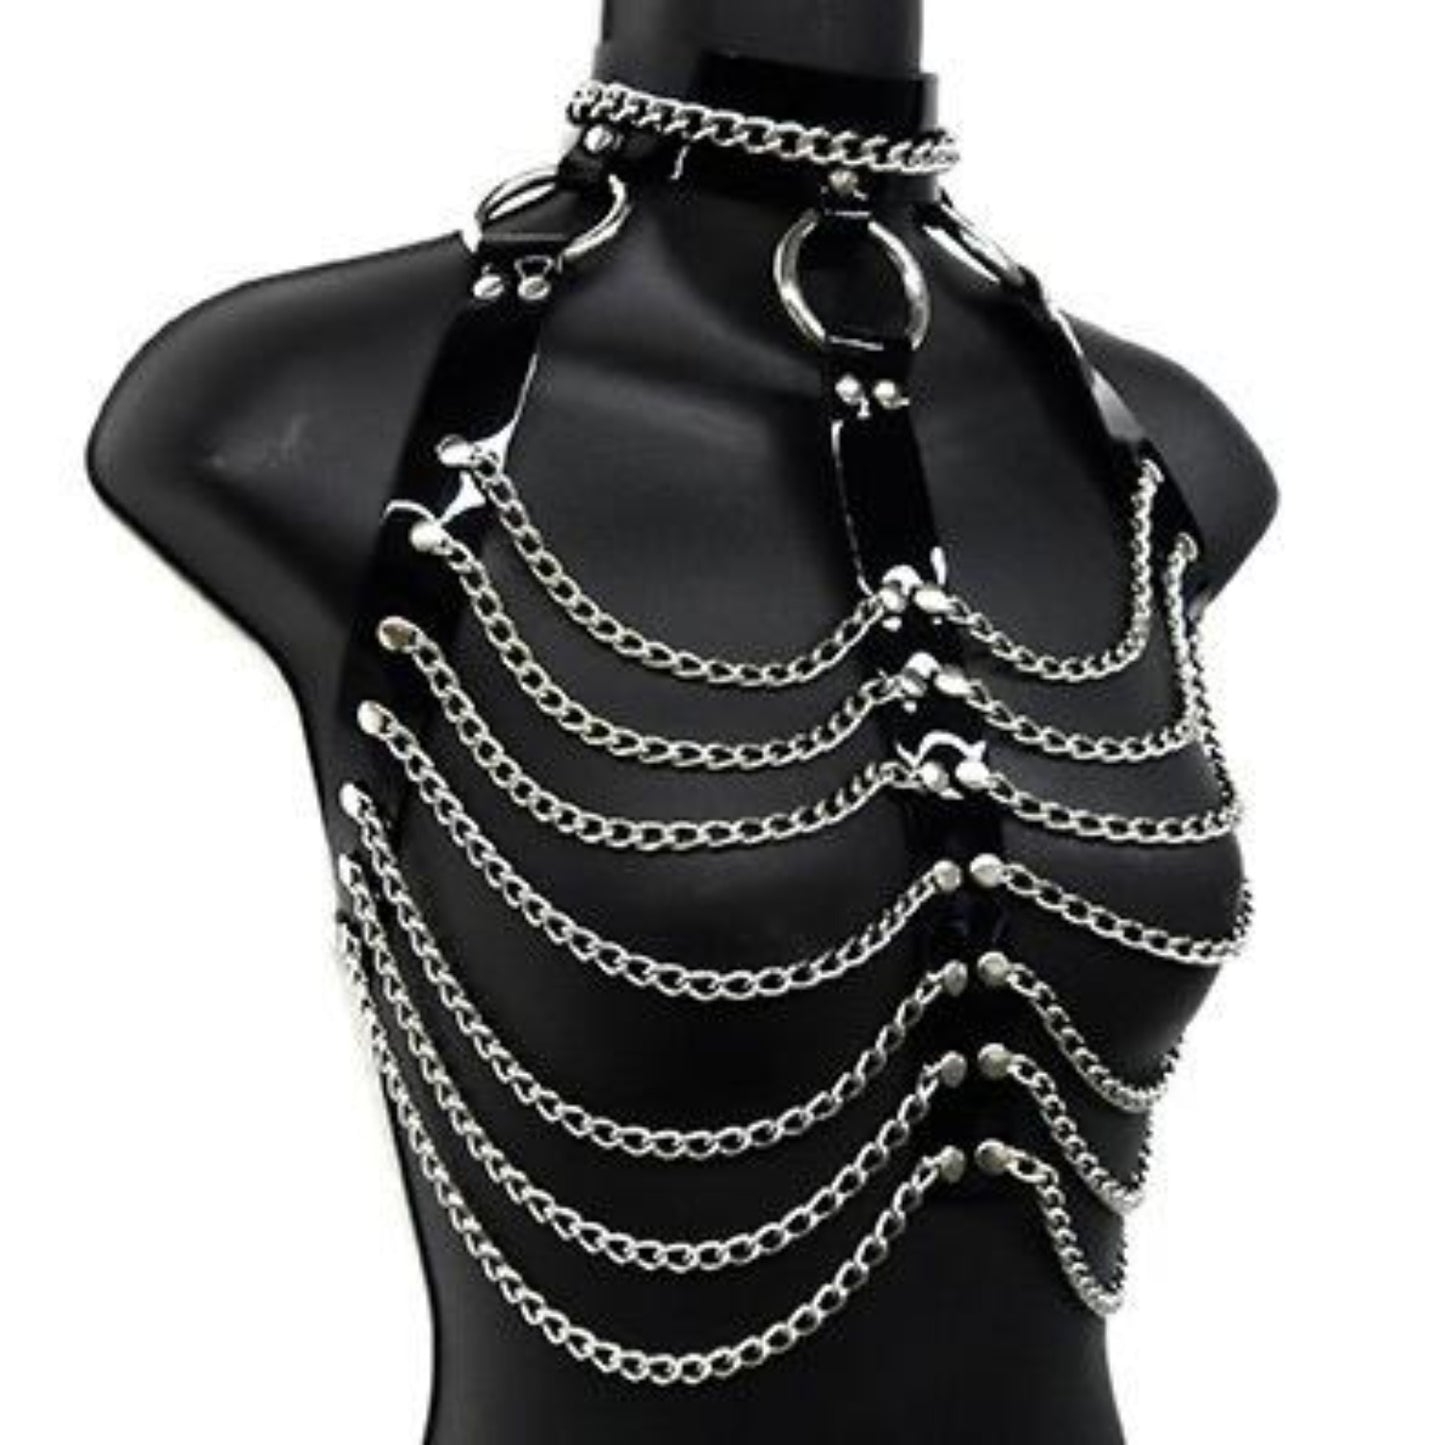 The black patent leather and chain three column halter harness on a mannequin.